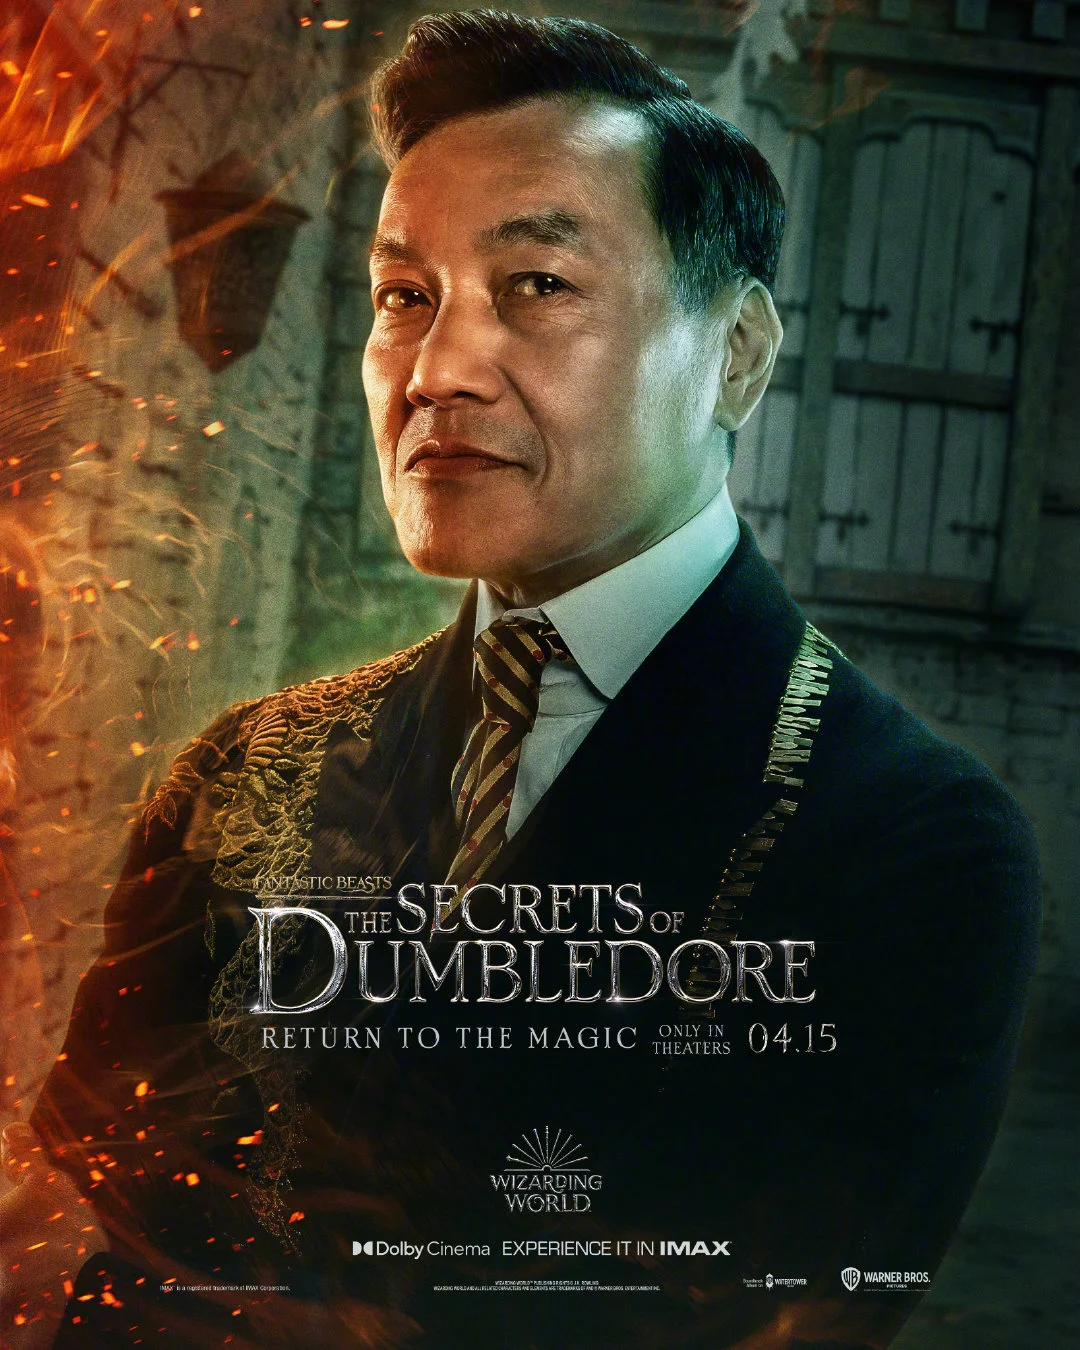 fantastic-beasts-the-secrets-of-dumbledore-releases-multiple-character-posters-18